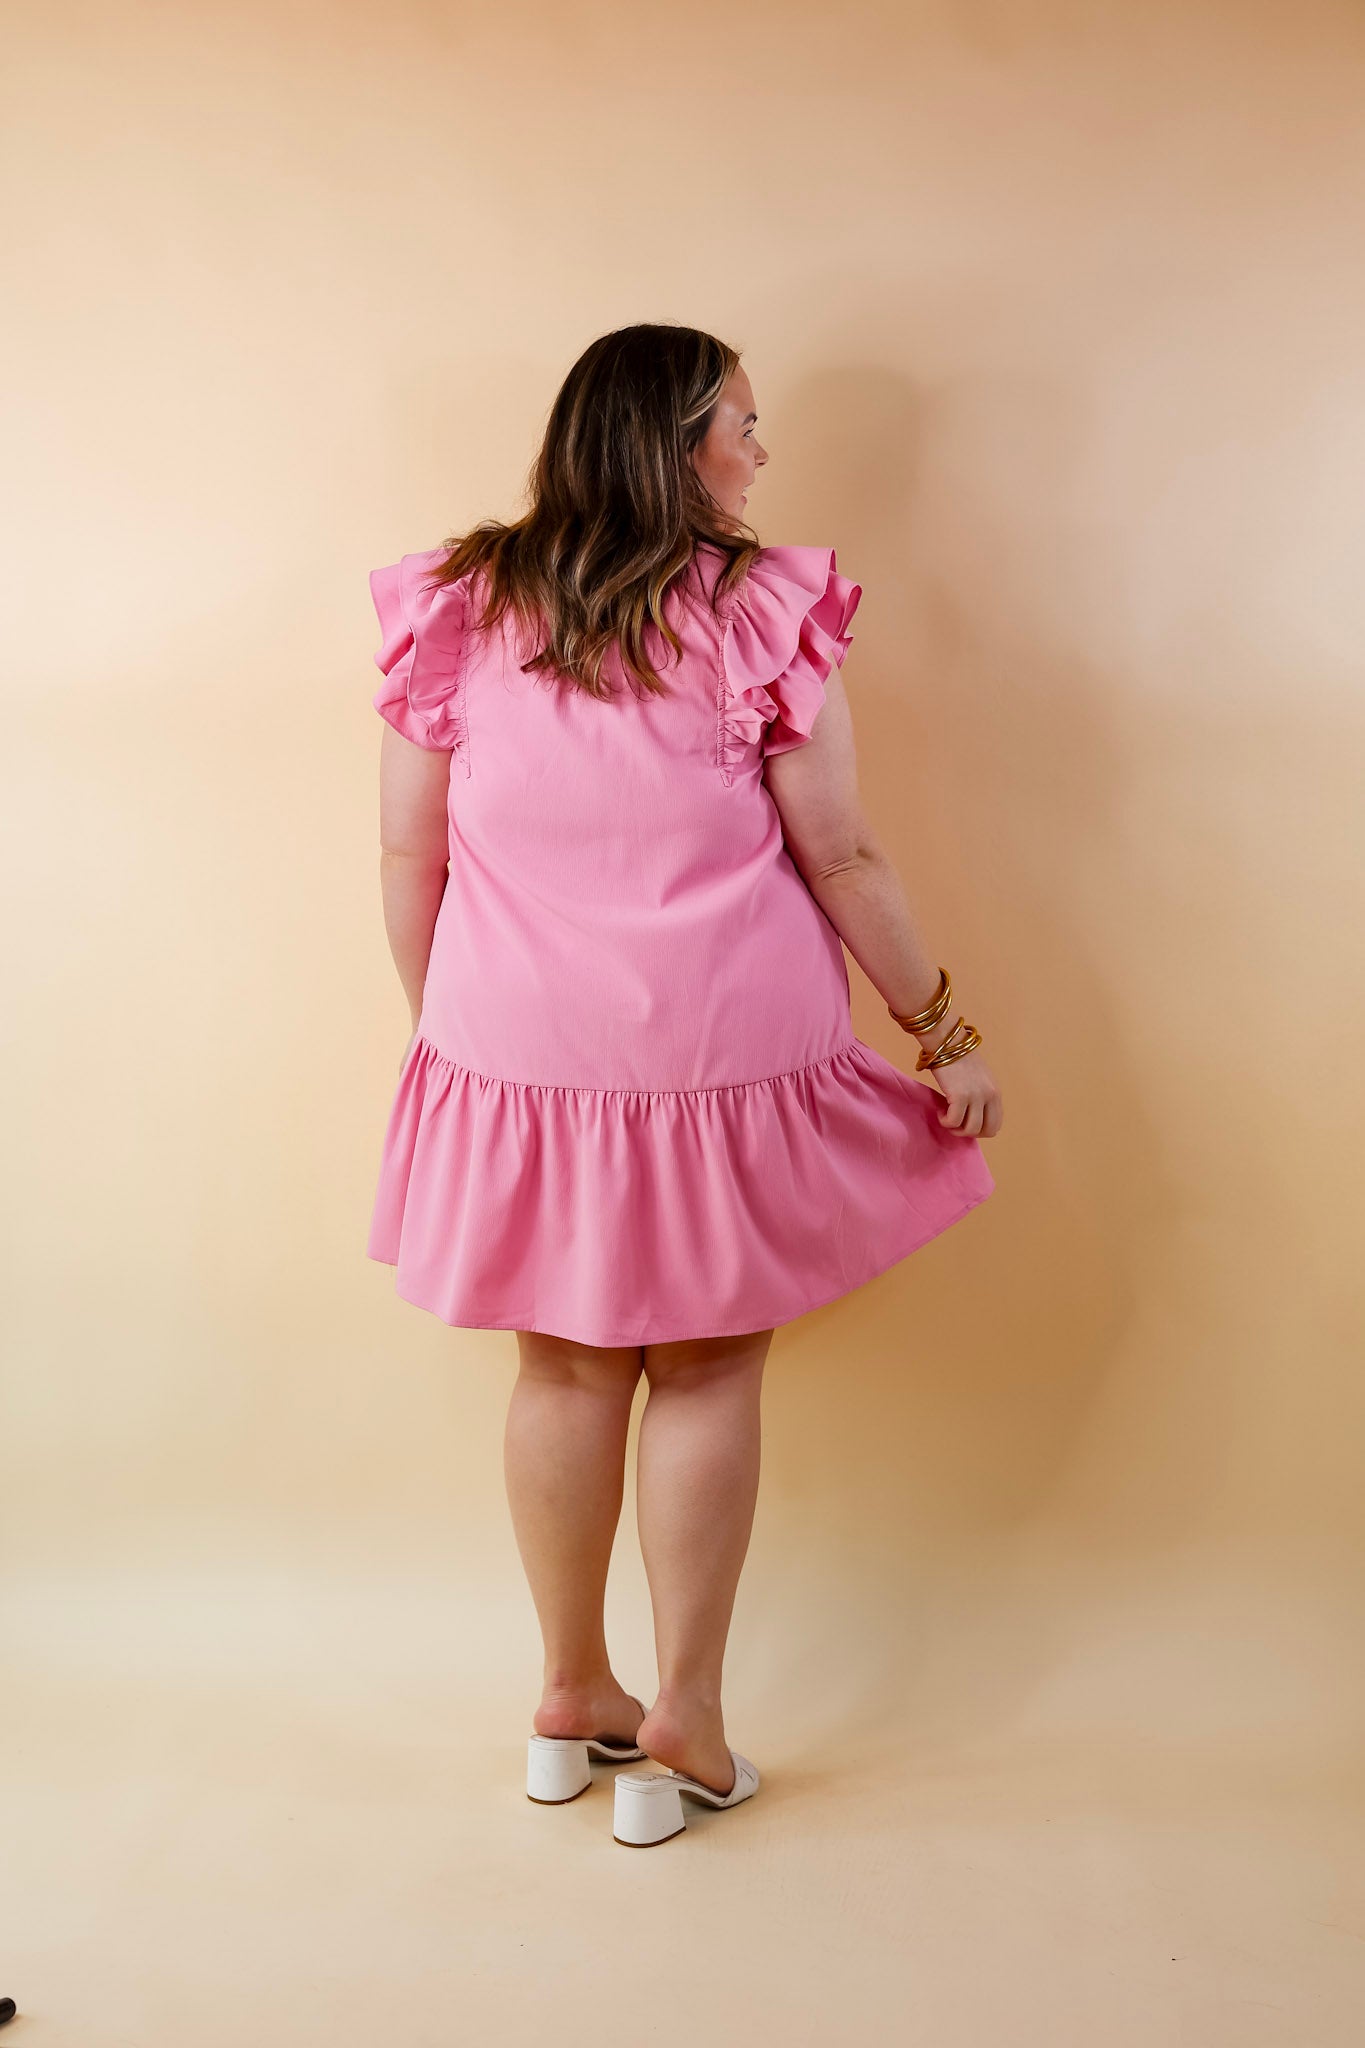 Powerful Love Ruffle Cap Sleeve Dress with Keyhole and Tie Neckline in Light Pink - Giddy Up Glamour Boutique